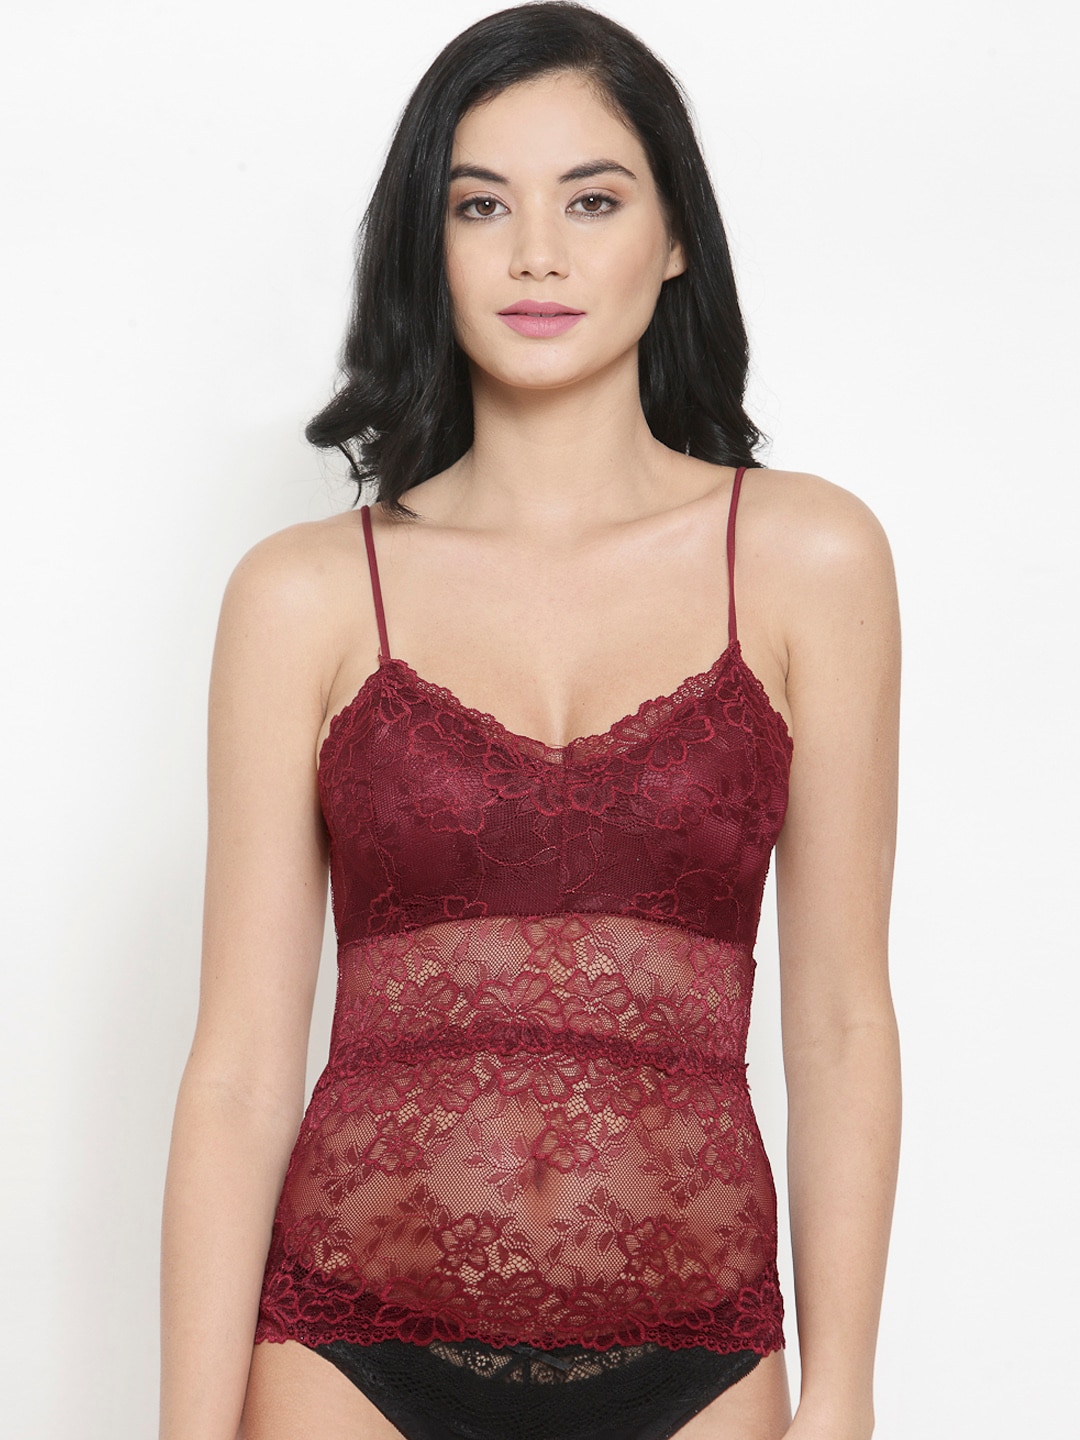 Buy PrettyCat PrettyCat Maroon Lace Non-Wired Lightly Padded